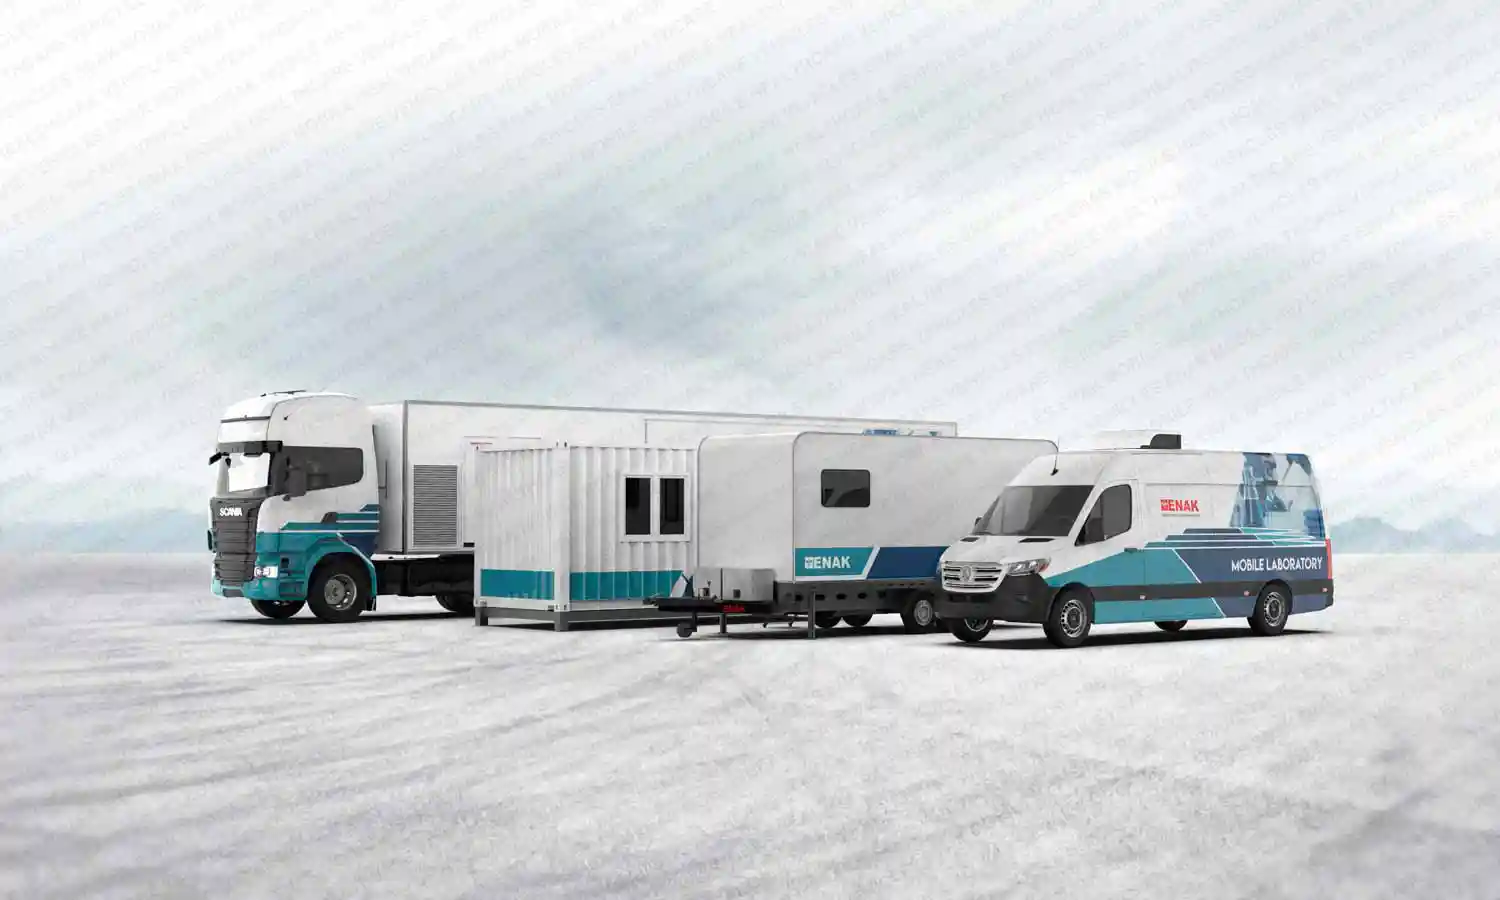 Hospital Trailer Products